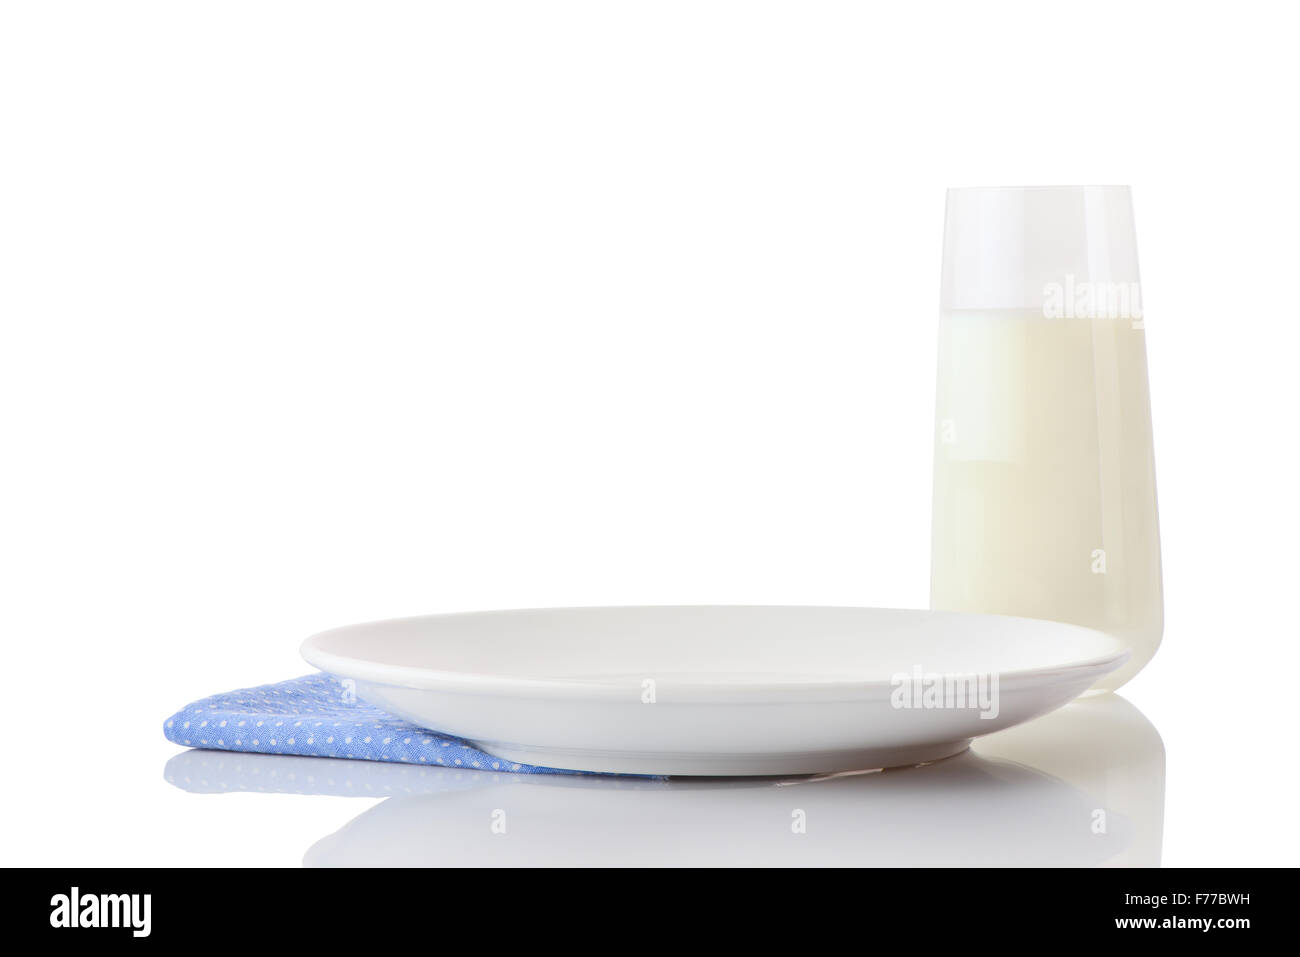 Empty white ceramic plate on blue napkin in small white polka dots and glass of milk, isolated on white background Stock Photo